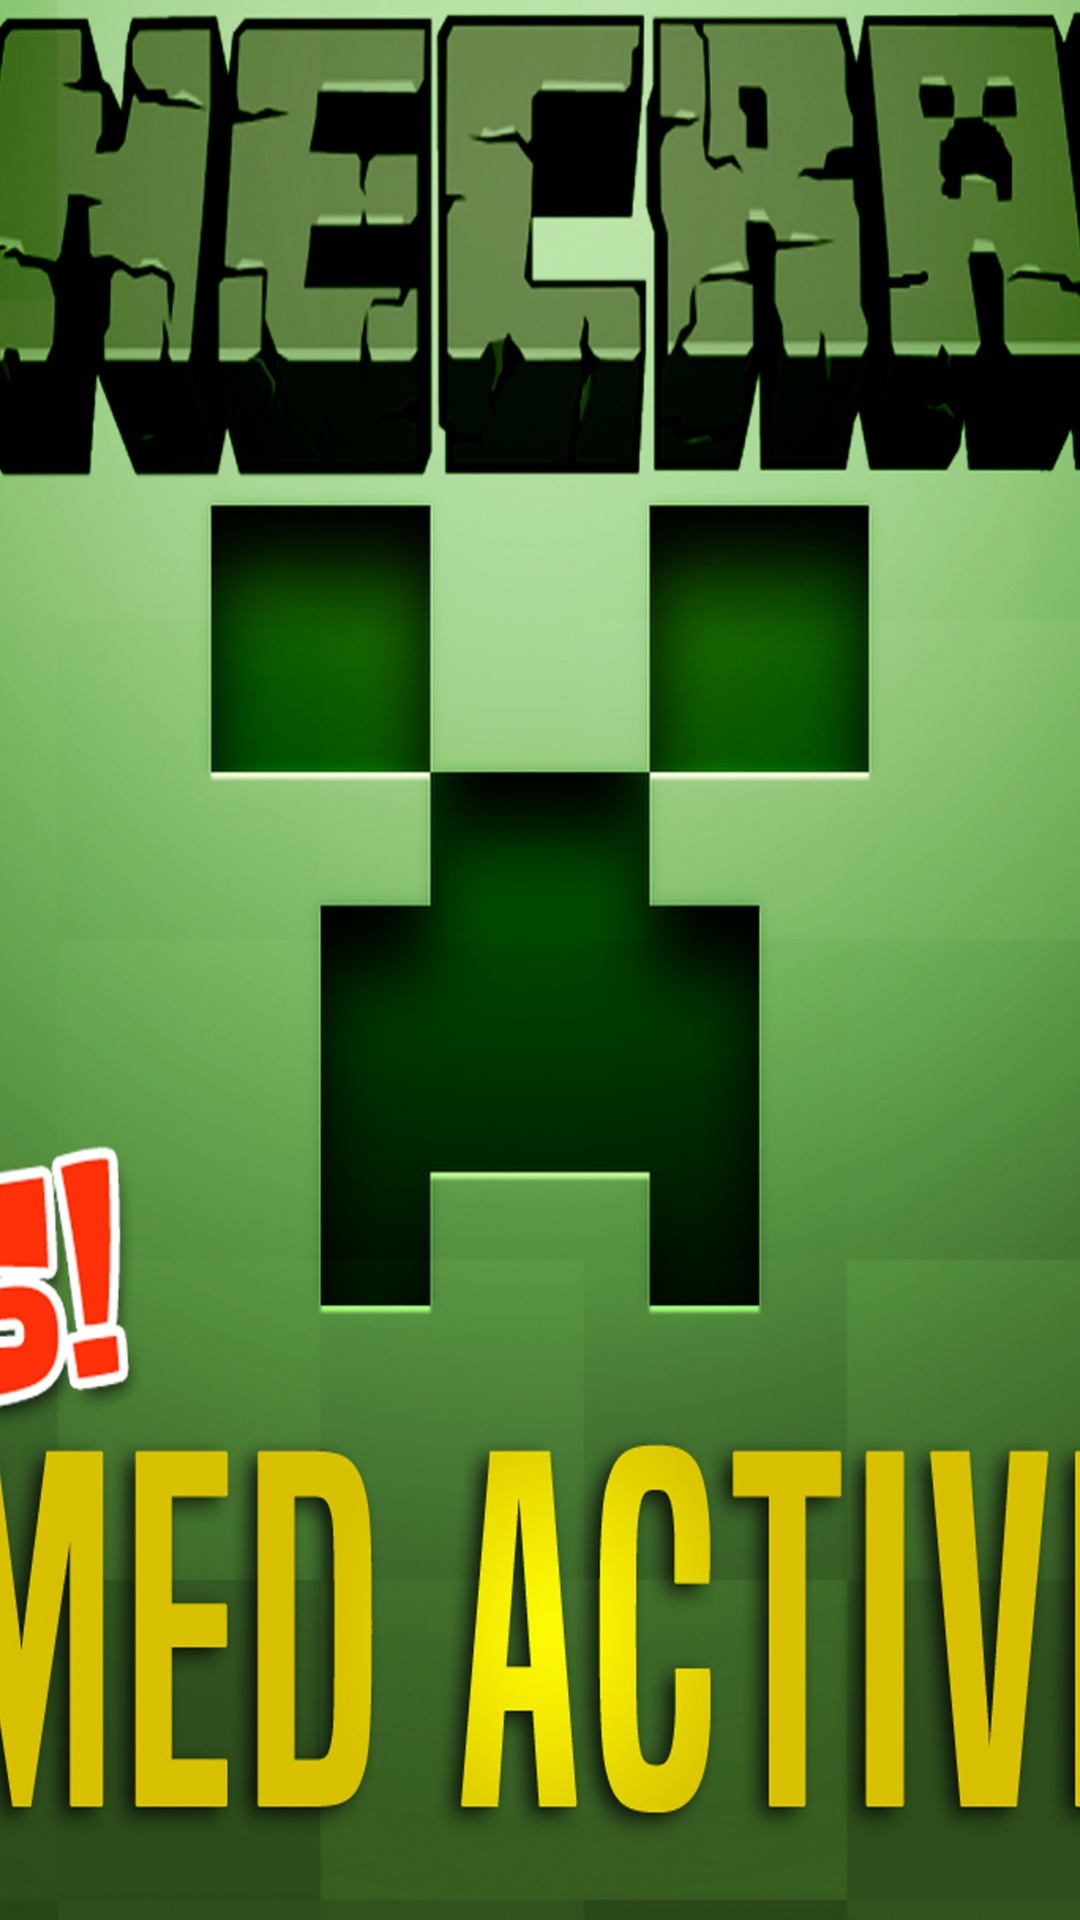 Minecraft, Green, Games, Creeper, Survival Game. Wallpaper in 1080x1920 Resolution